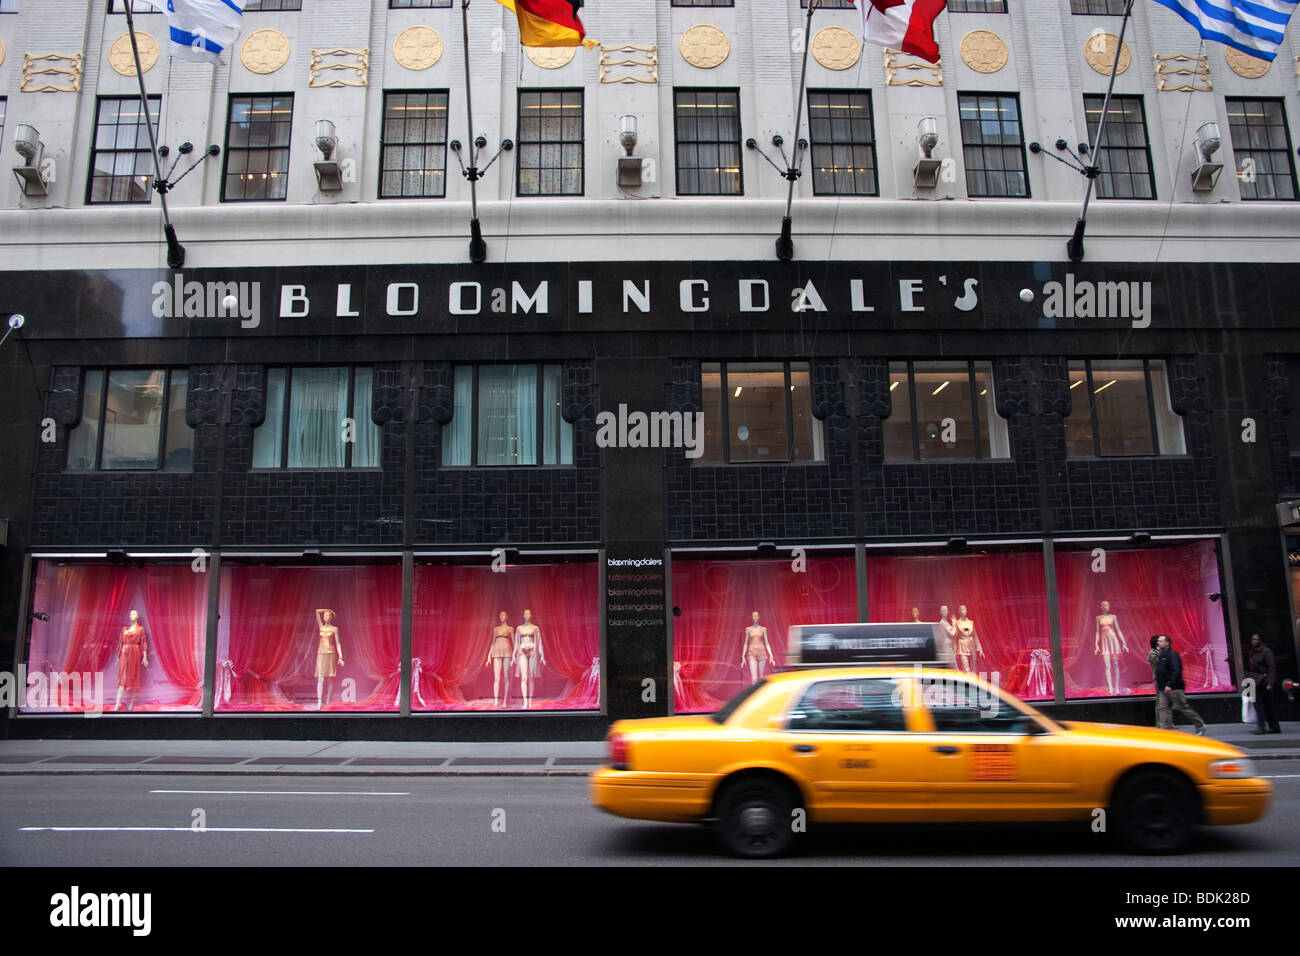 Entrance Canopy Of The Original Bloomingdales In Midtown Manhattan At 1000  3rd Avenue 59th Street And Lexington Avenue New York High-Res Stock Photo -  Getty Images